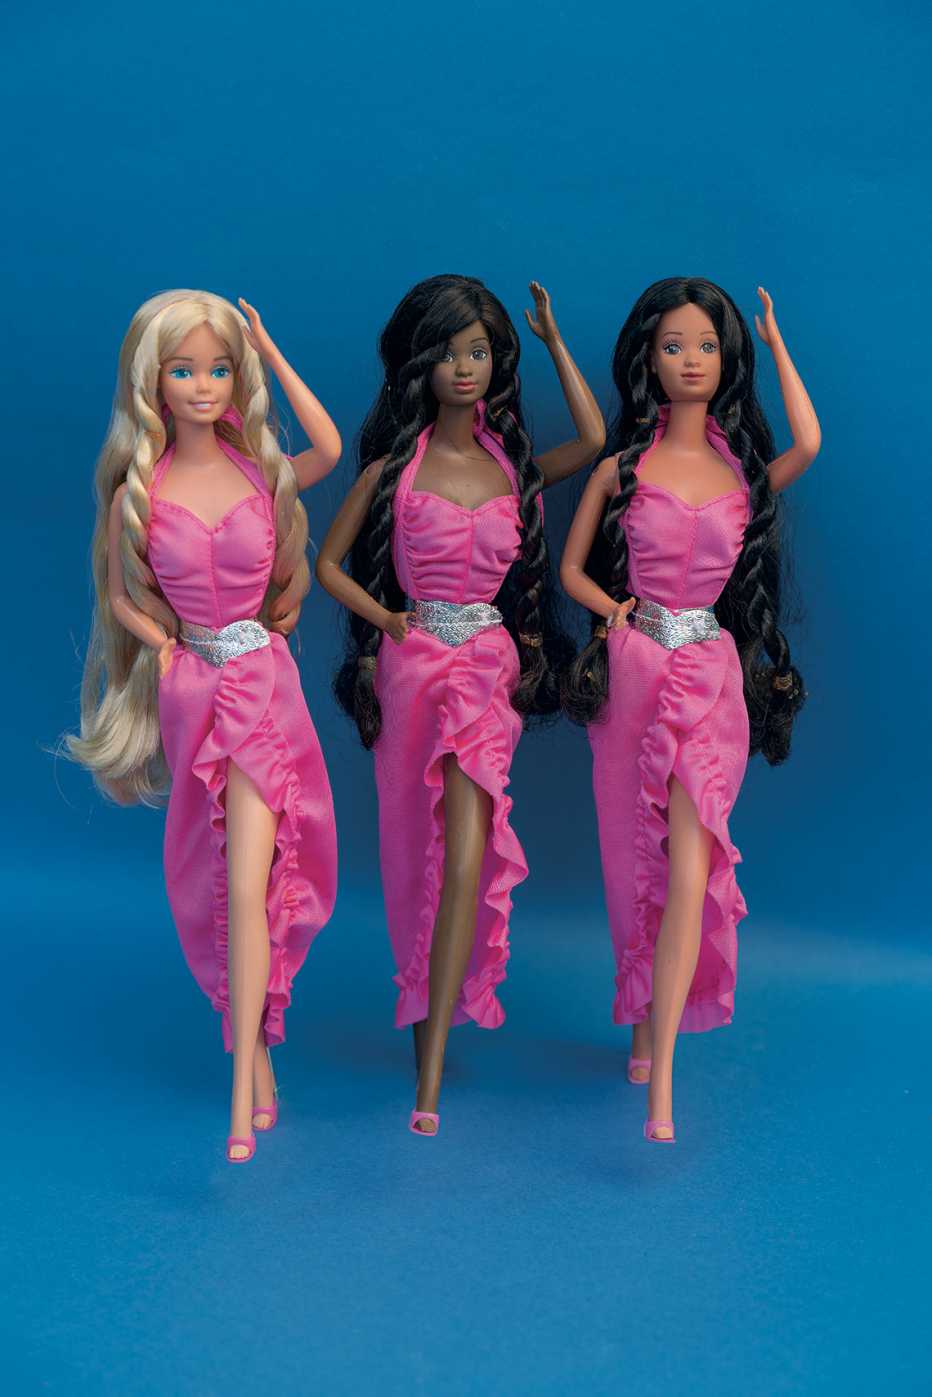 3 barbie dolls wearing pink dresses with a twisty curl hairstyle